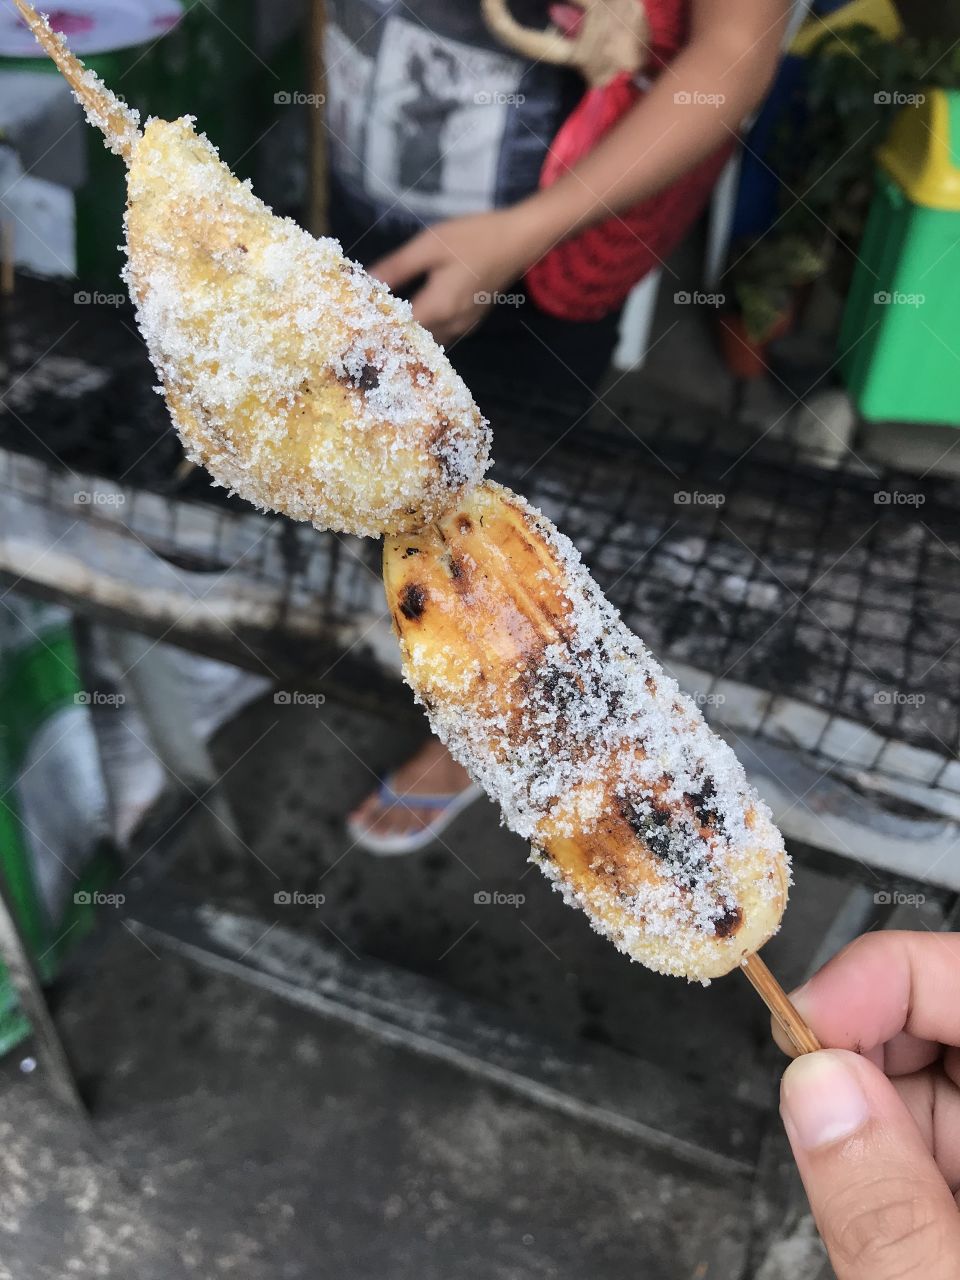 "Ginanggang" as this is locally called, made from a ripe Philippine Plantain. Skewed and cooked using coal, brushed with margarine and sprinkled with sugar. Snack!